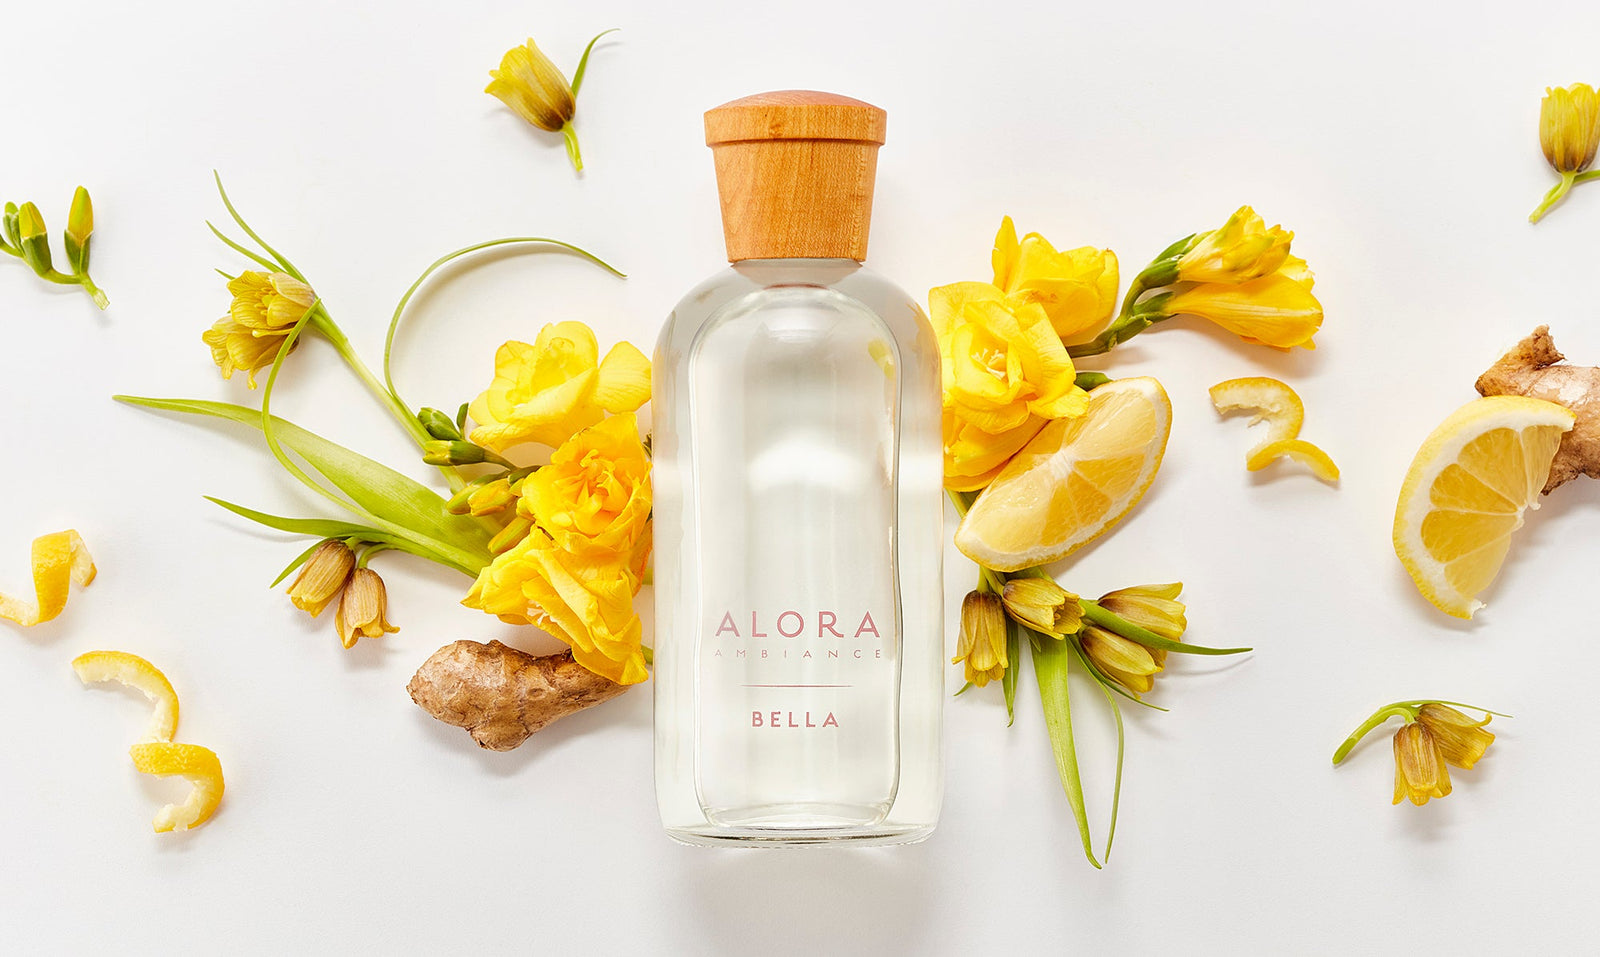 Bella diffuser bottle laying next to ylang ylang flowers, lemon slices, and ginger pieces